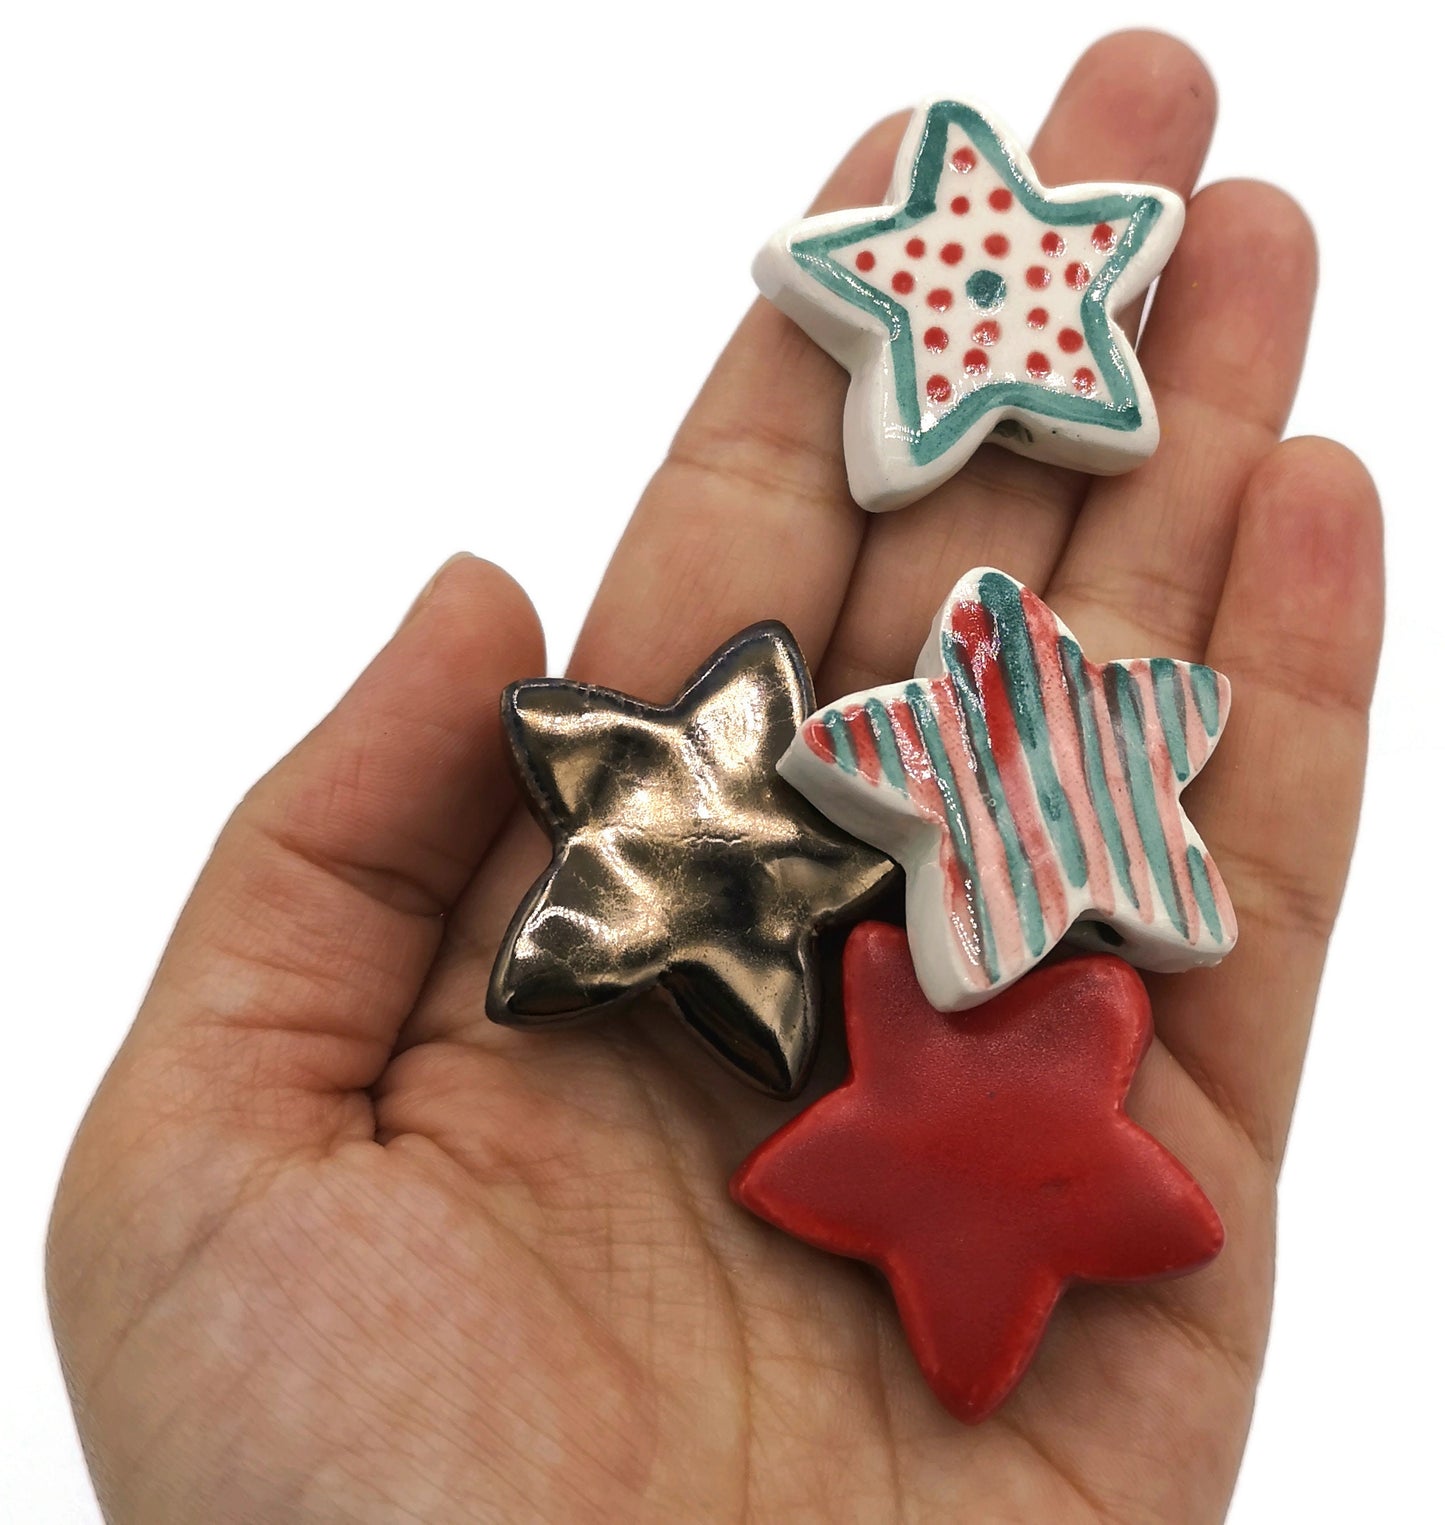 4Pcs 35mm Extra Large Handmade Ceramic Star Beads For Christmas Themed Jewelry Making, Assorted Clay Macrame Beads Large Hole 2mm - Ceramica Ana Rafael